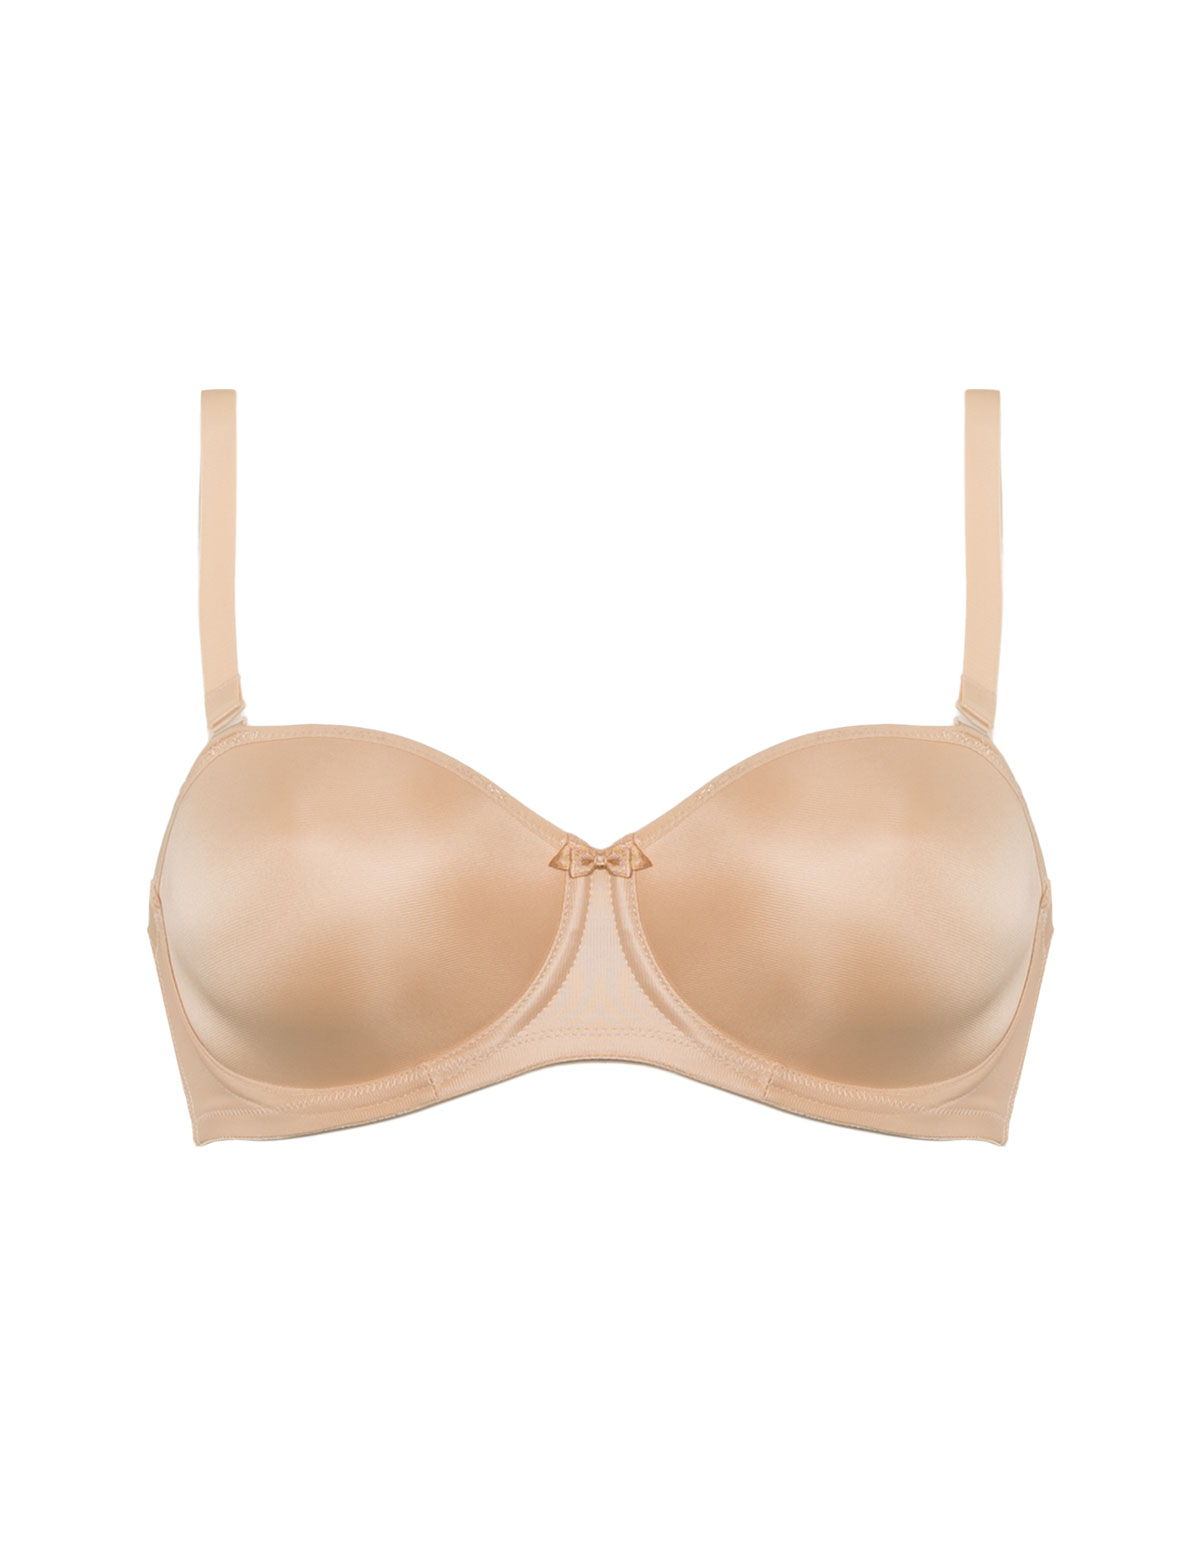 Smoothing moulded strapless bra by
Elomi